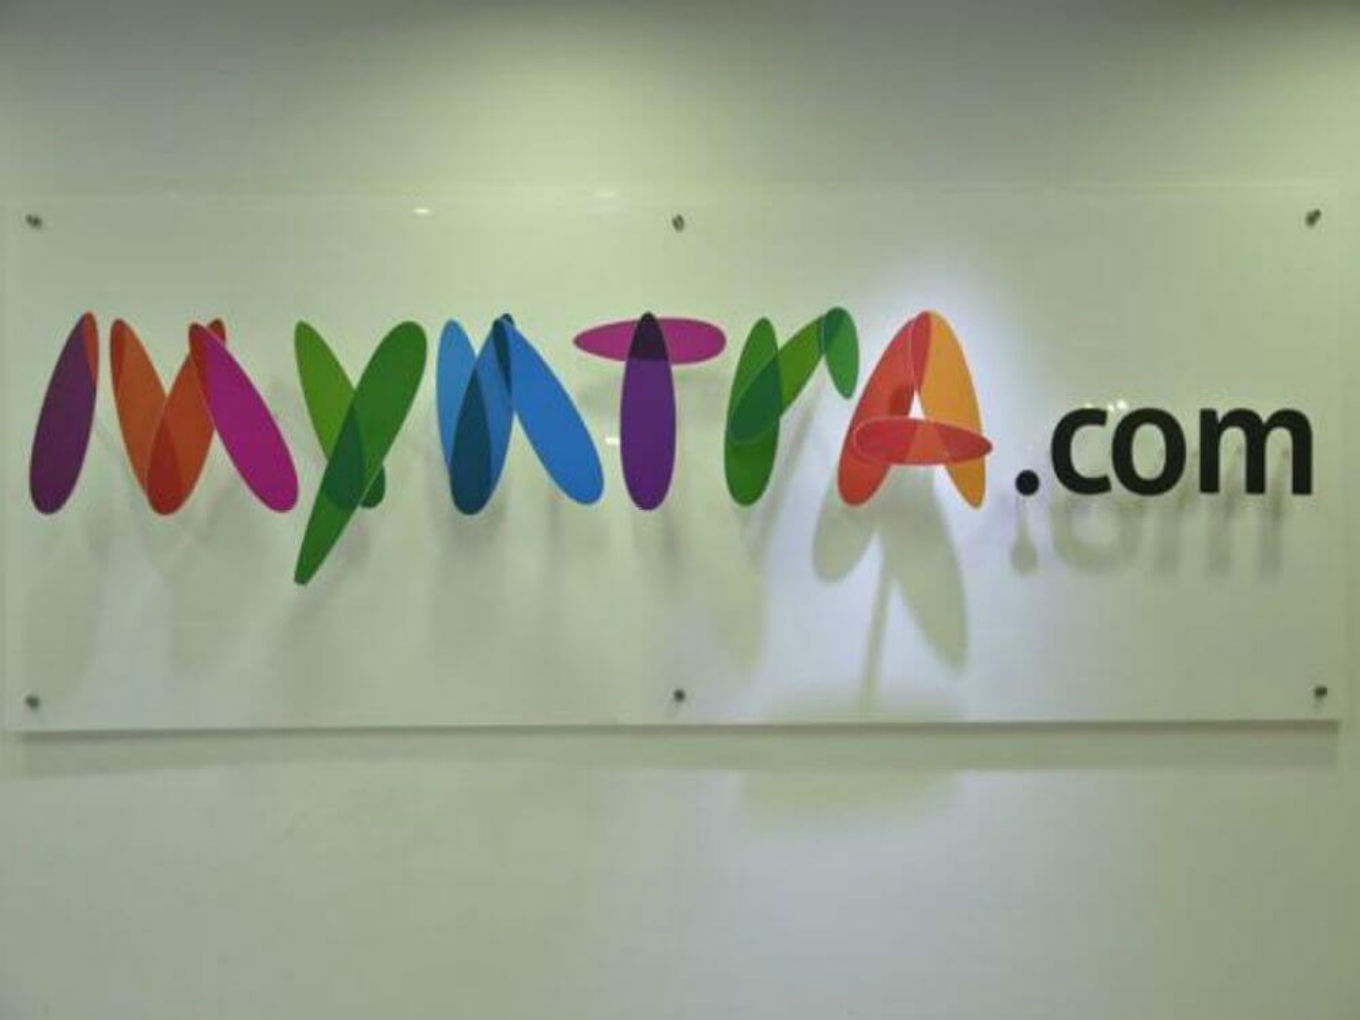 Myntra Hits Annual Run Rate Of $2 Bn GMV: Sources